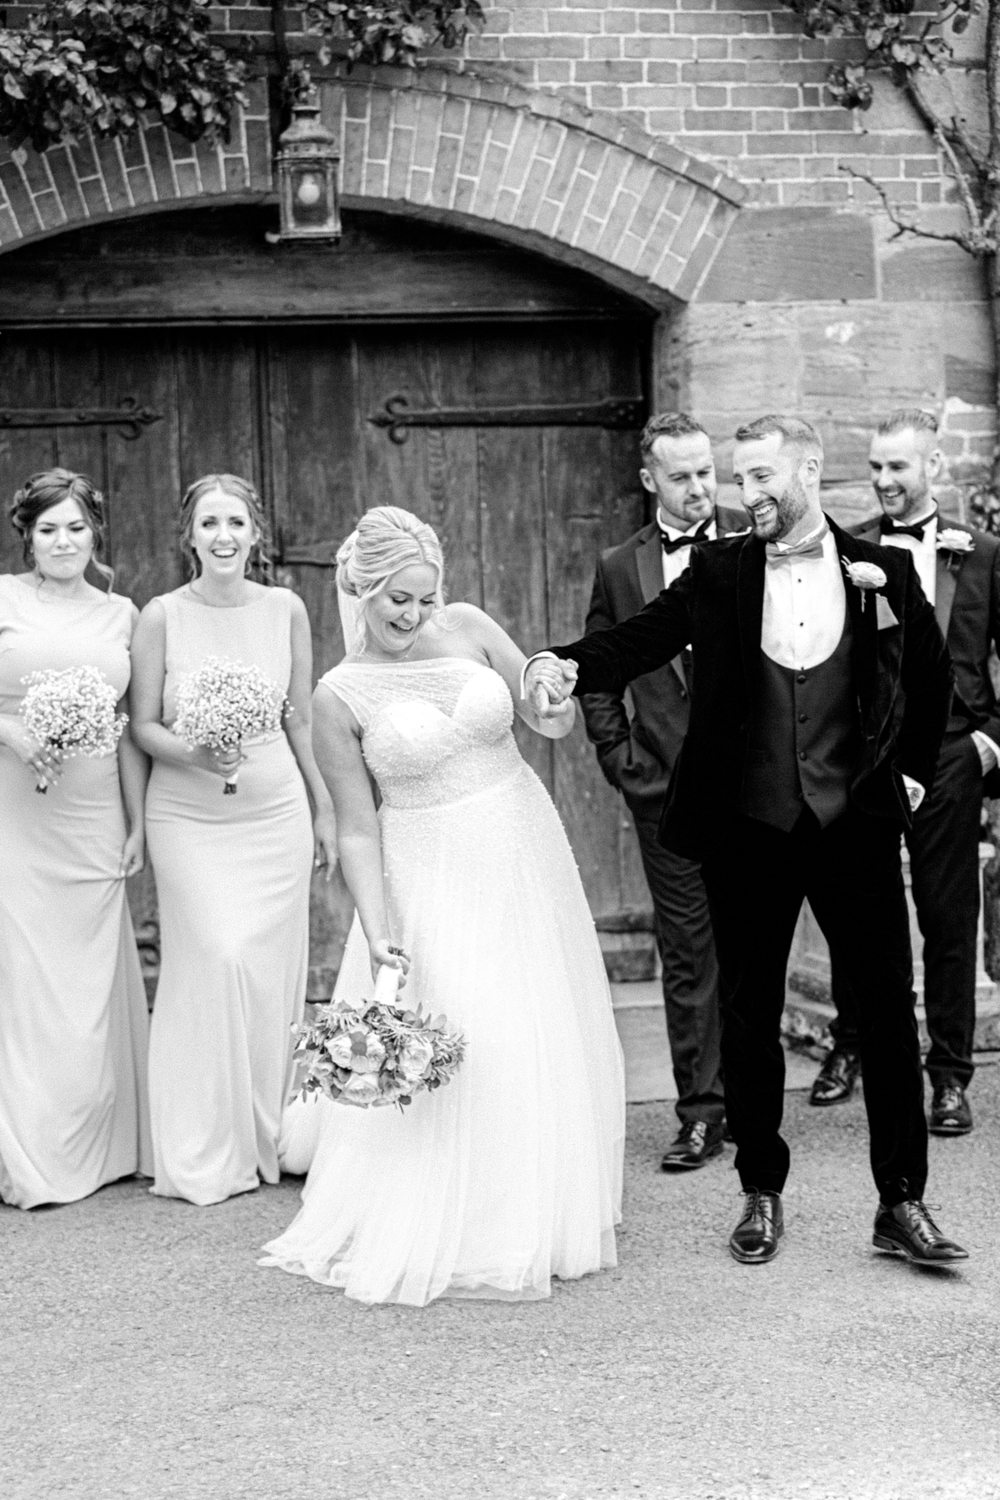 Bride and Groom take romantic stroll at Brinsop Court